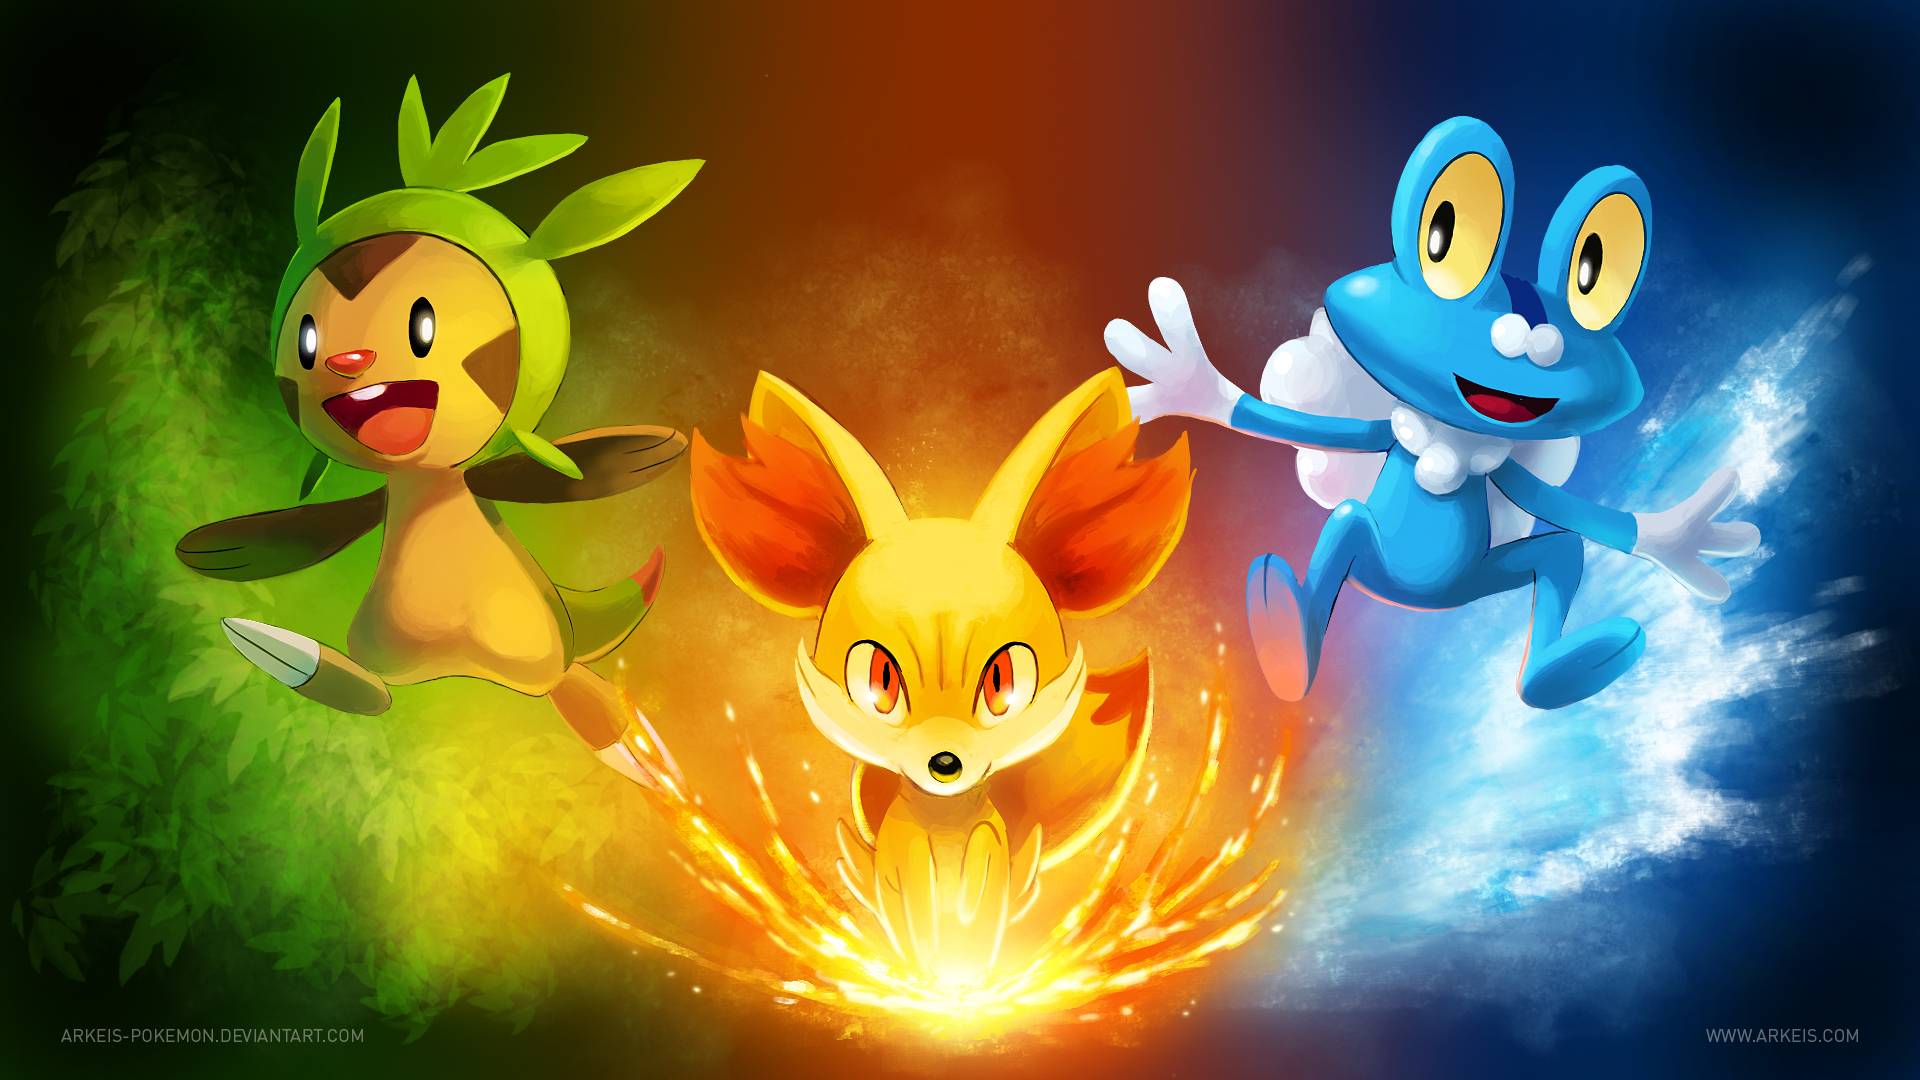 pokemon x and y hd wallpaper GamingBoltcom Video Game